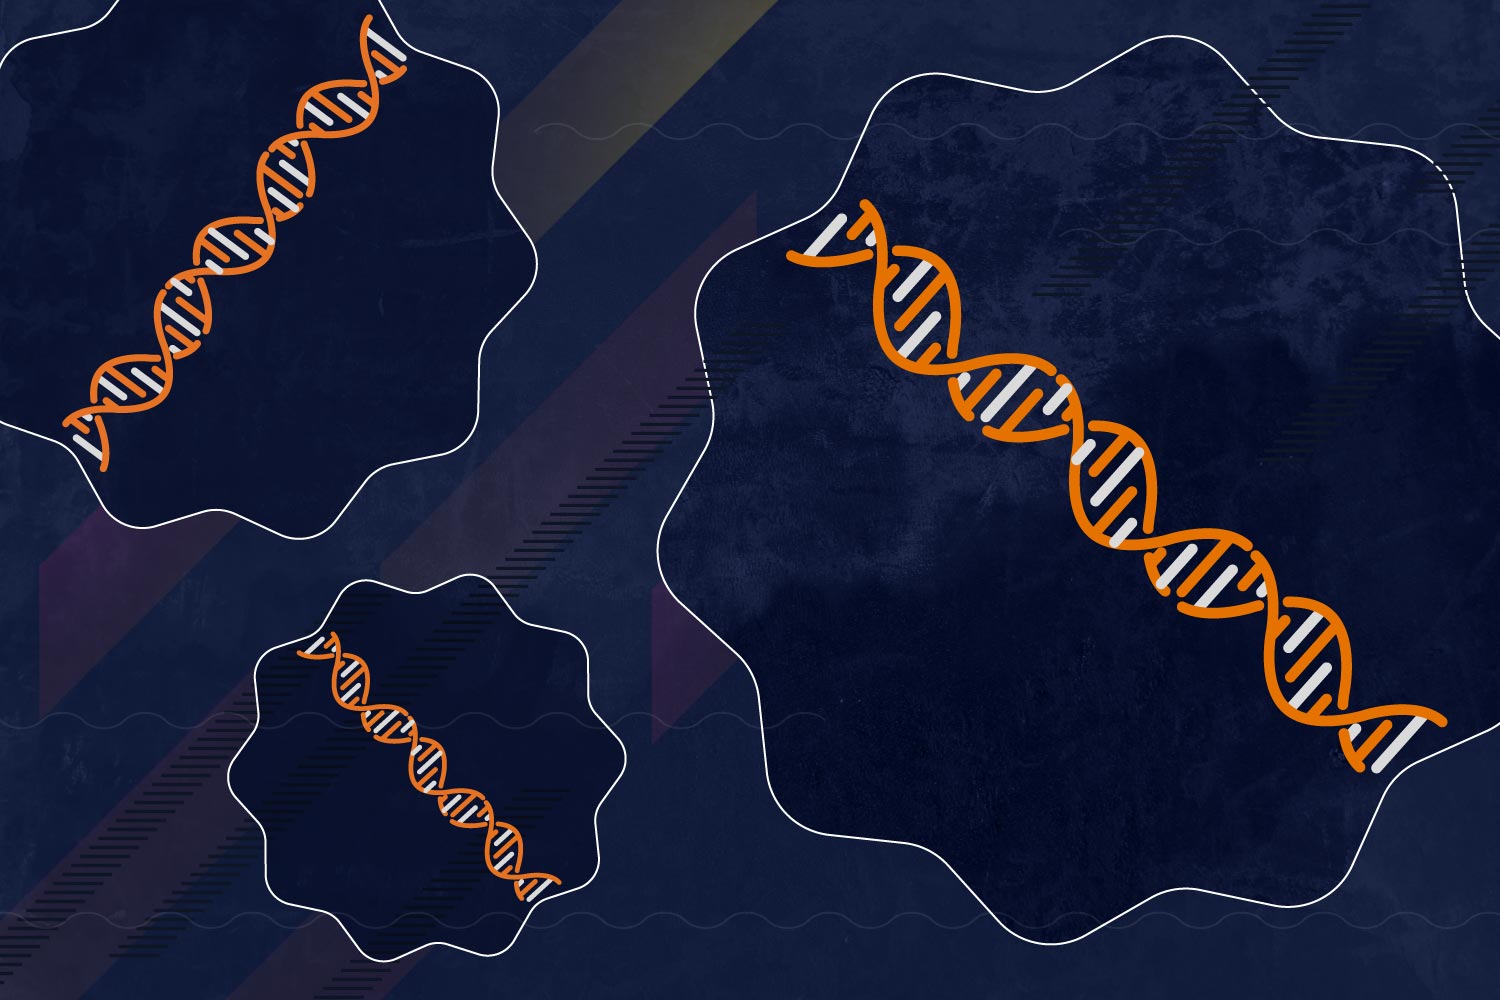 Illustration of DNA inside of a squiggly lined circle